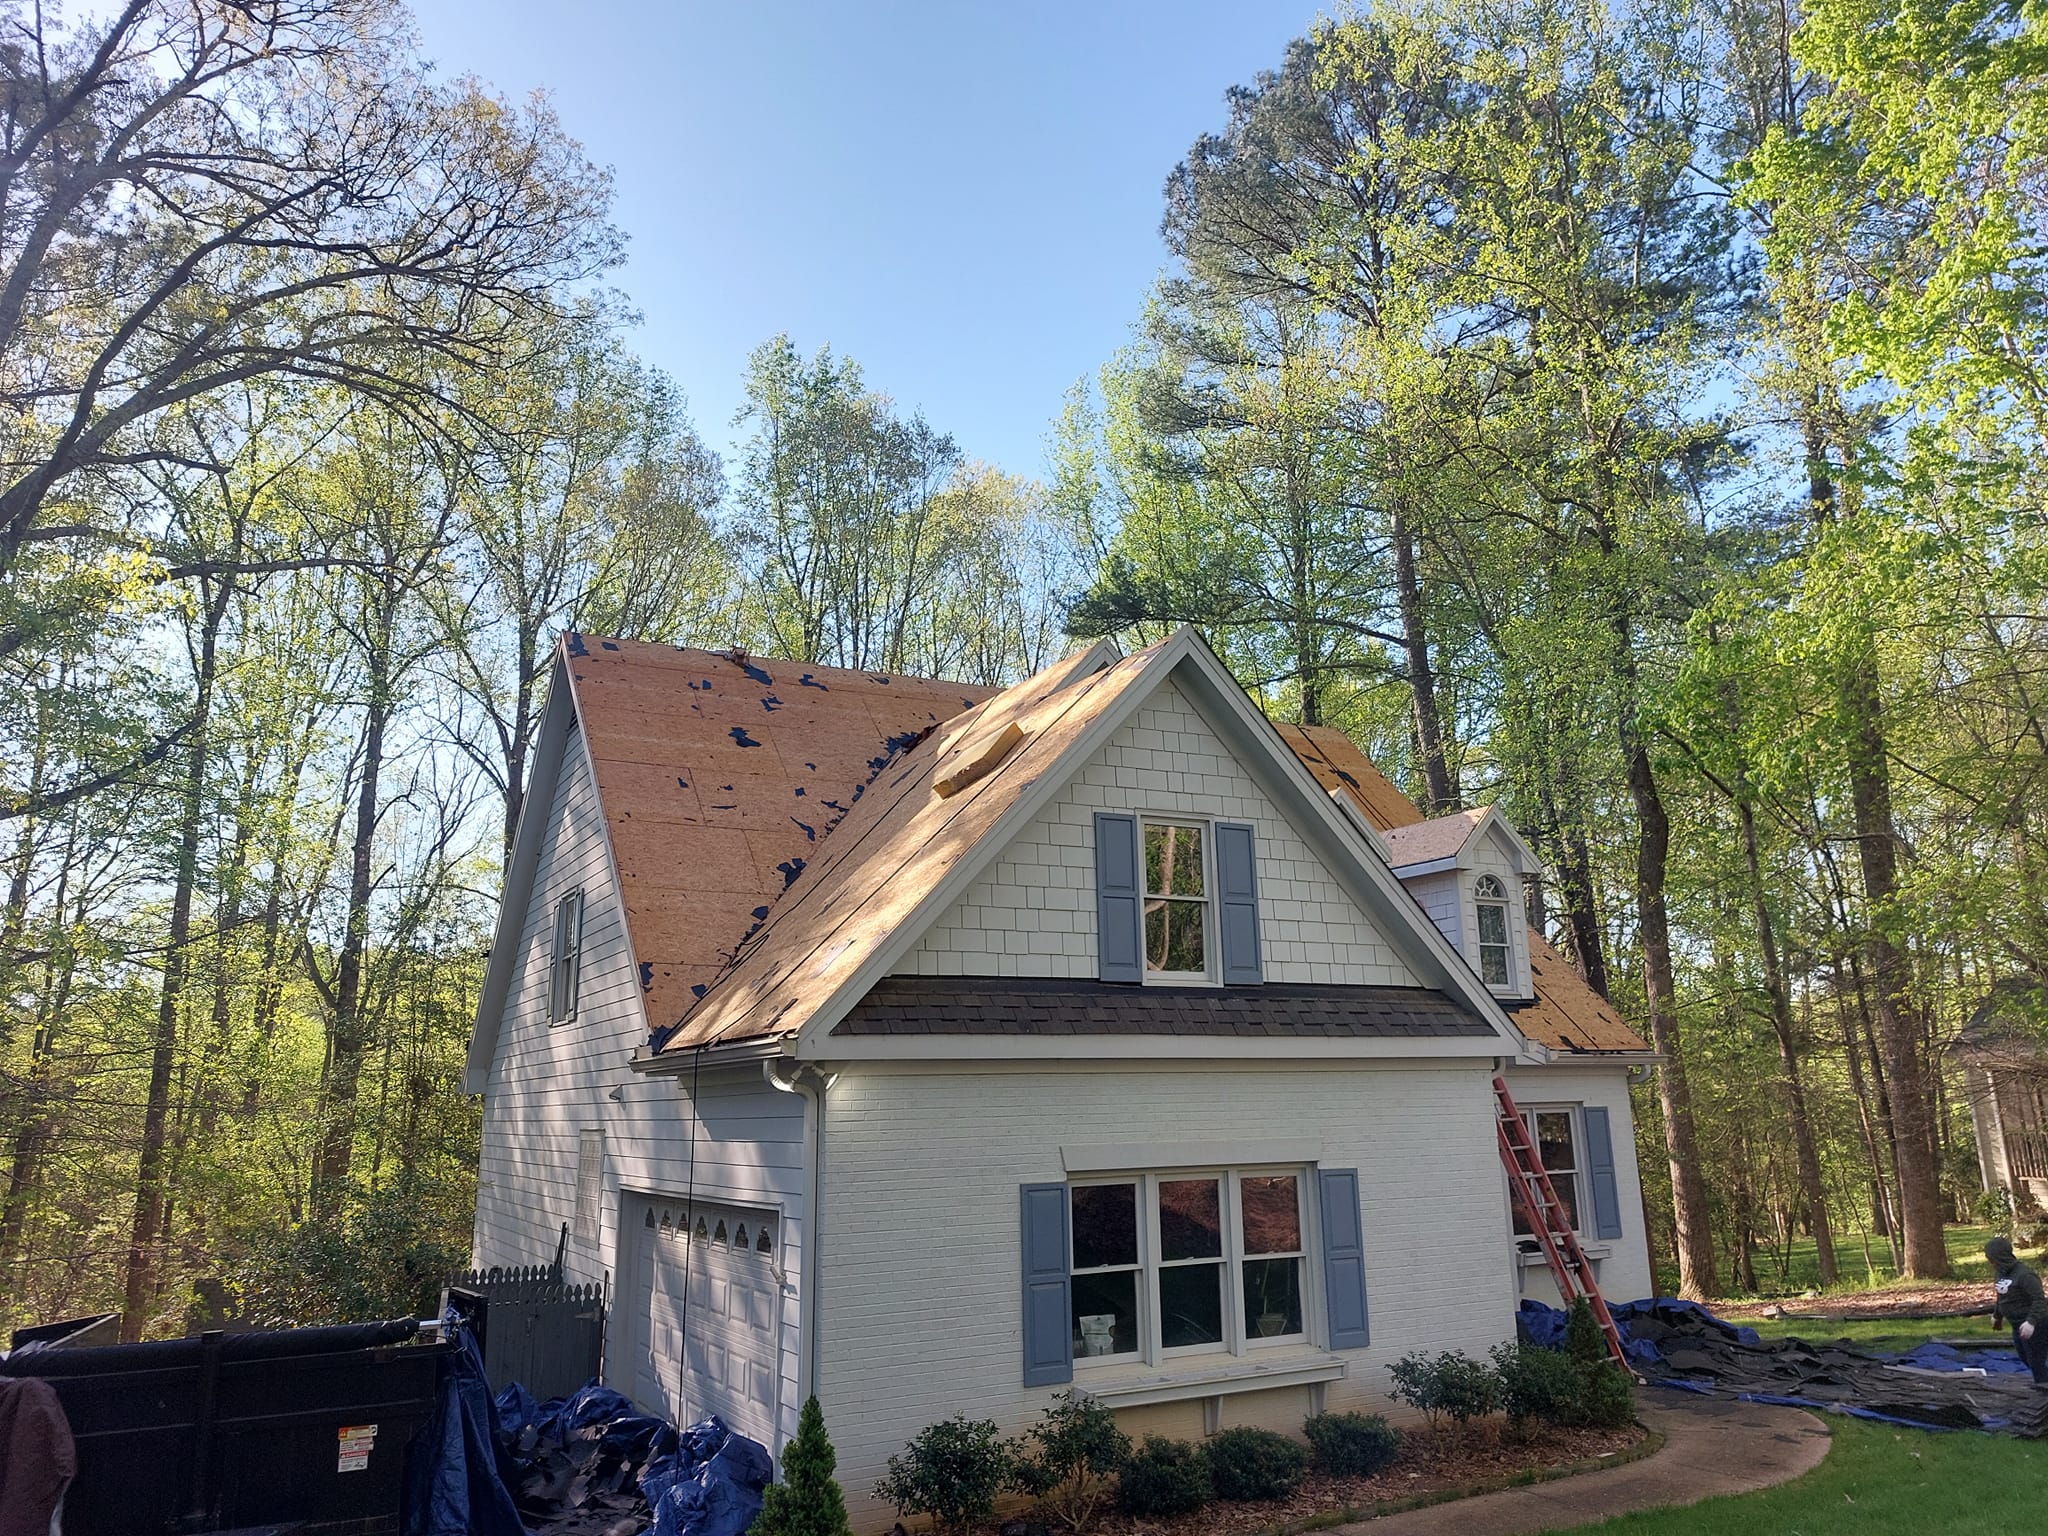 Roofing Repair Services in North Carolina